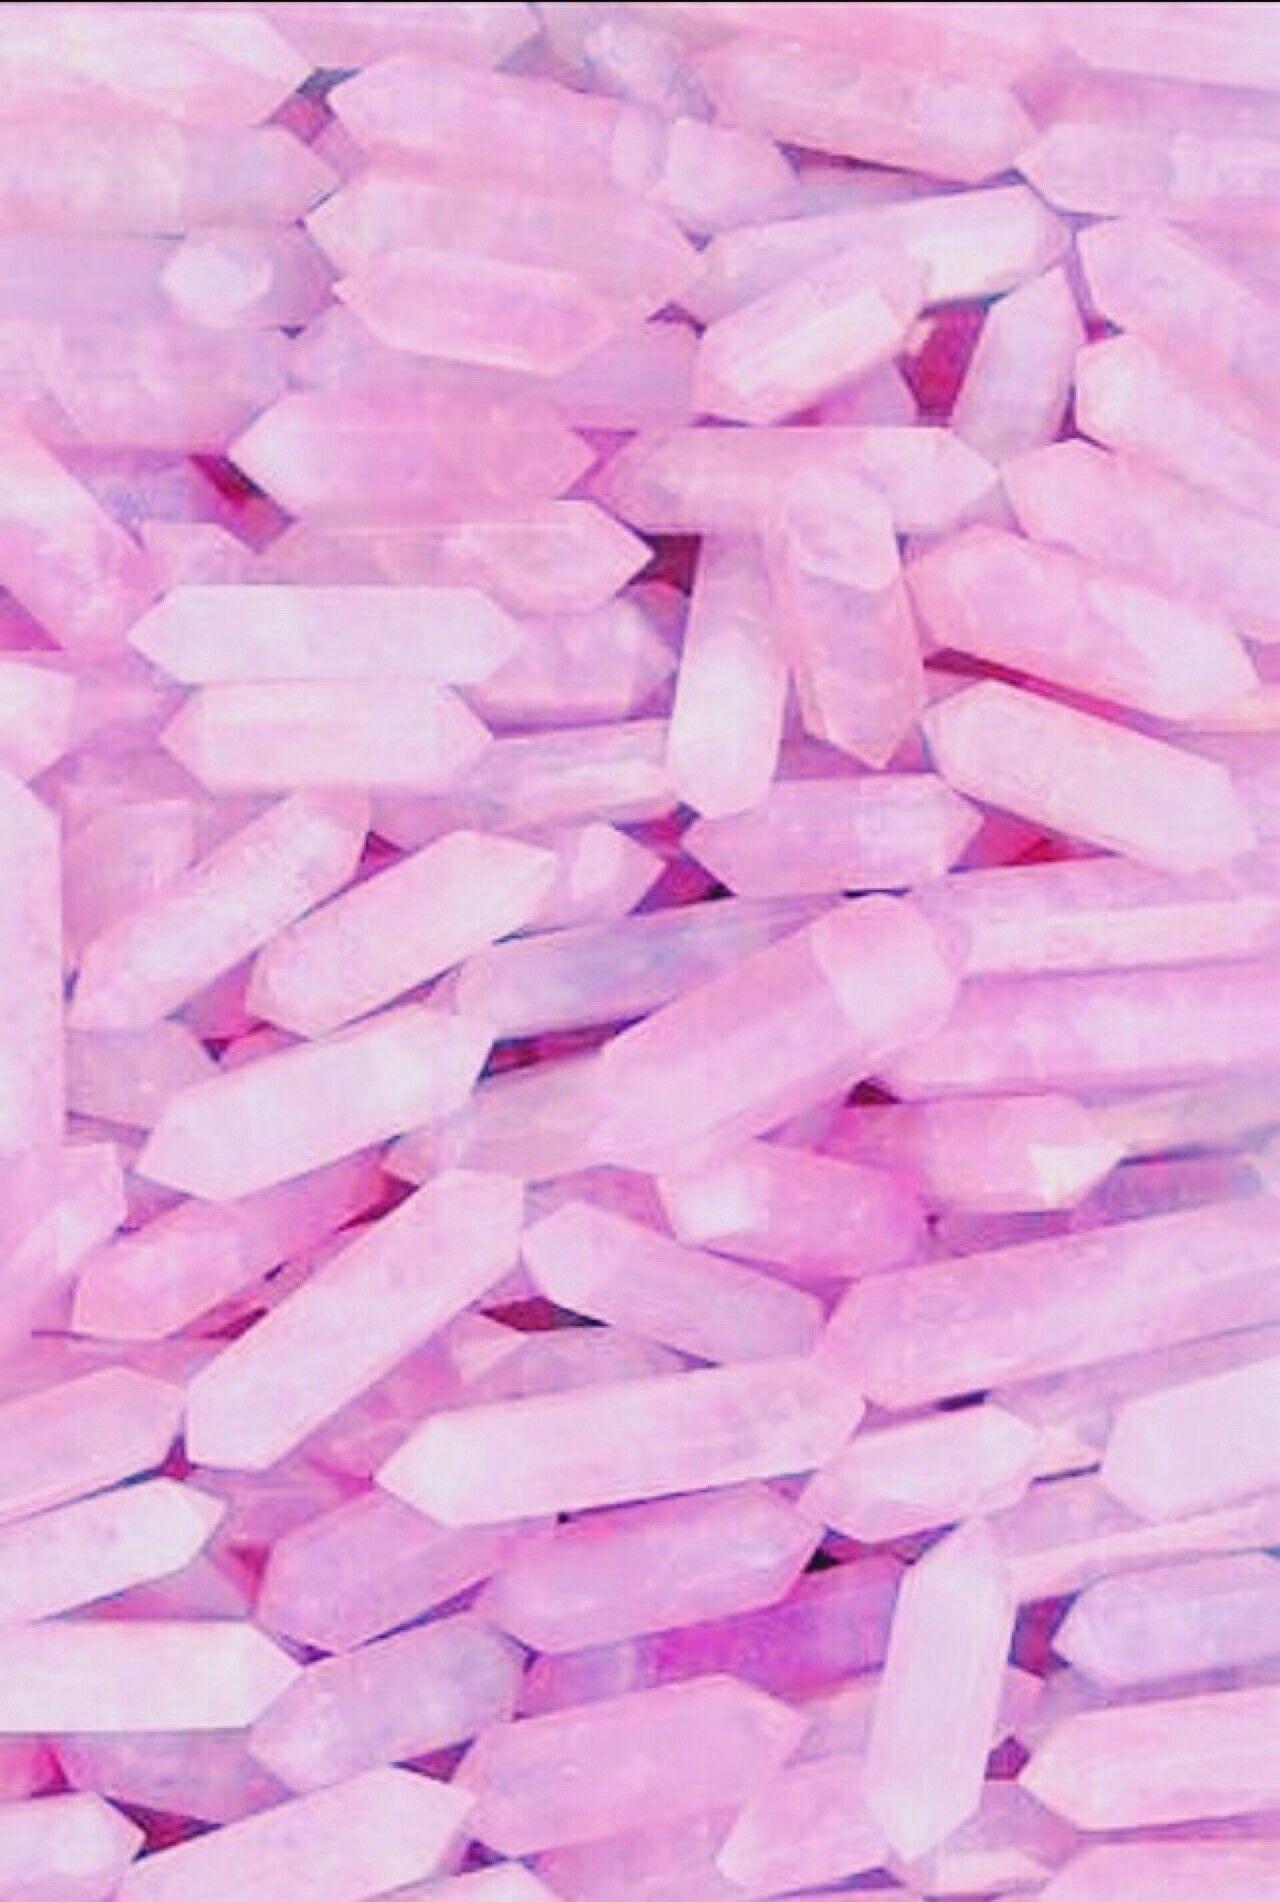 Aesthetic background of pink crystals - Magenta, pastel pink, YouTube, pink, candy